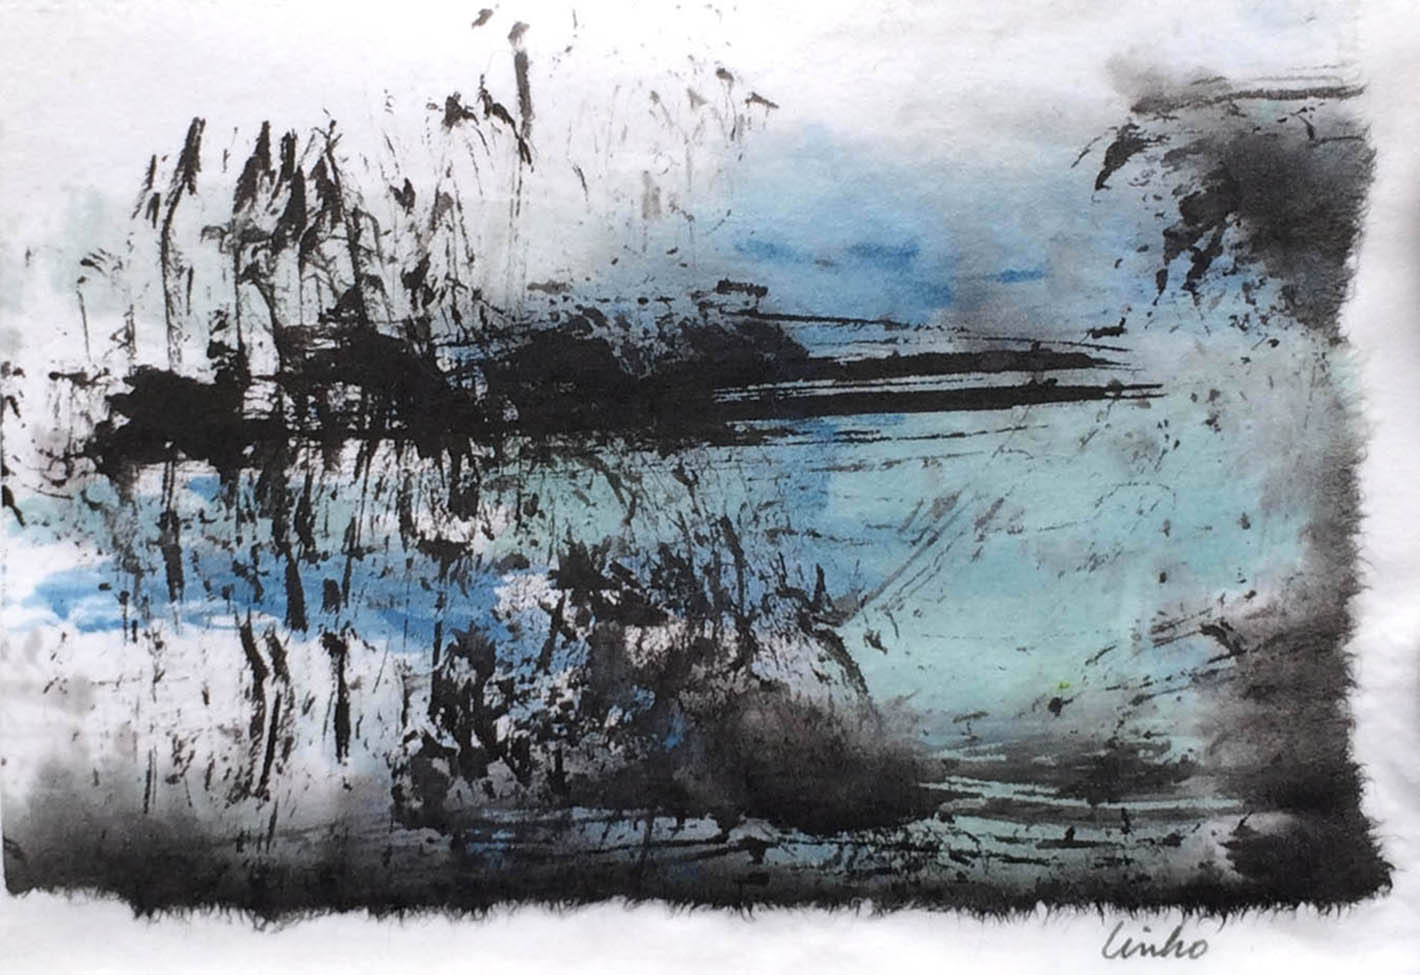 LindaMulhauser_ThatCoolLittlePainting_sumi&watercolor_4x3